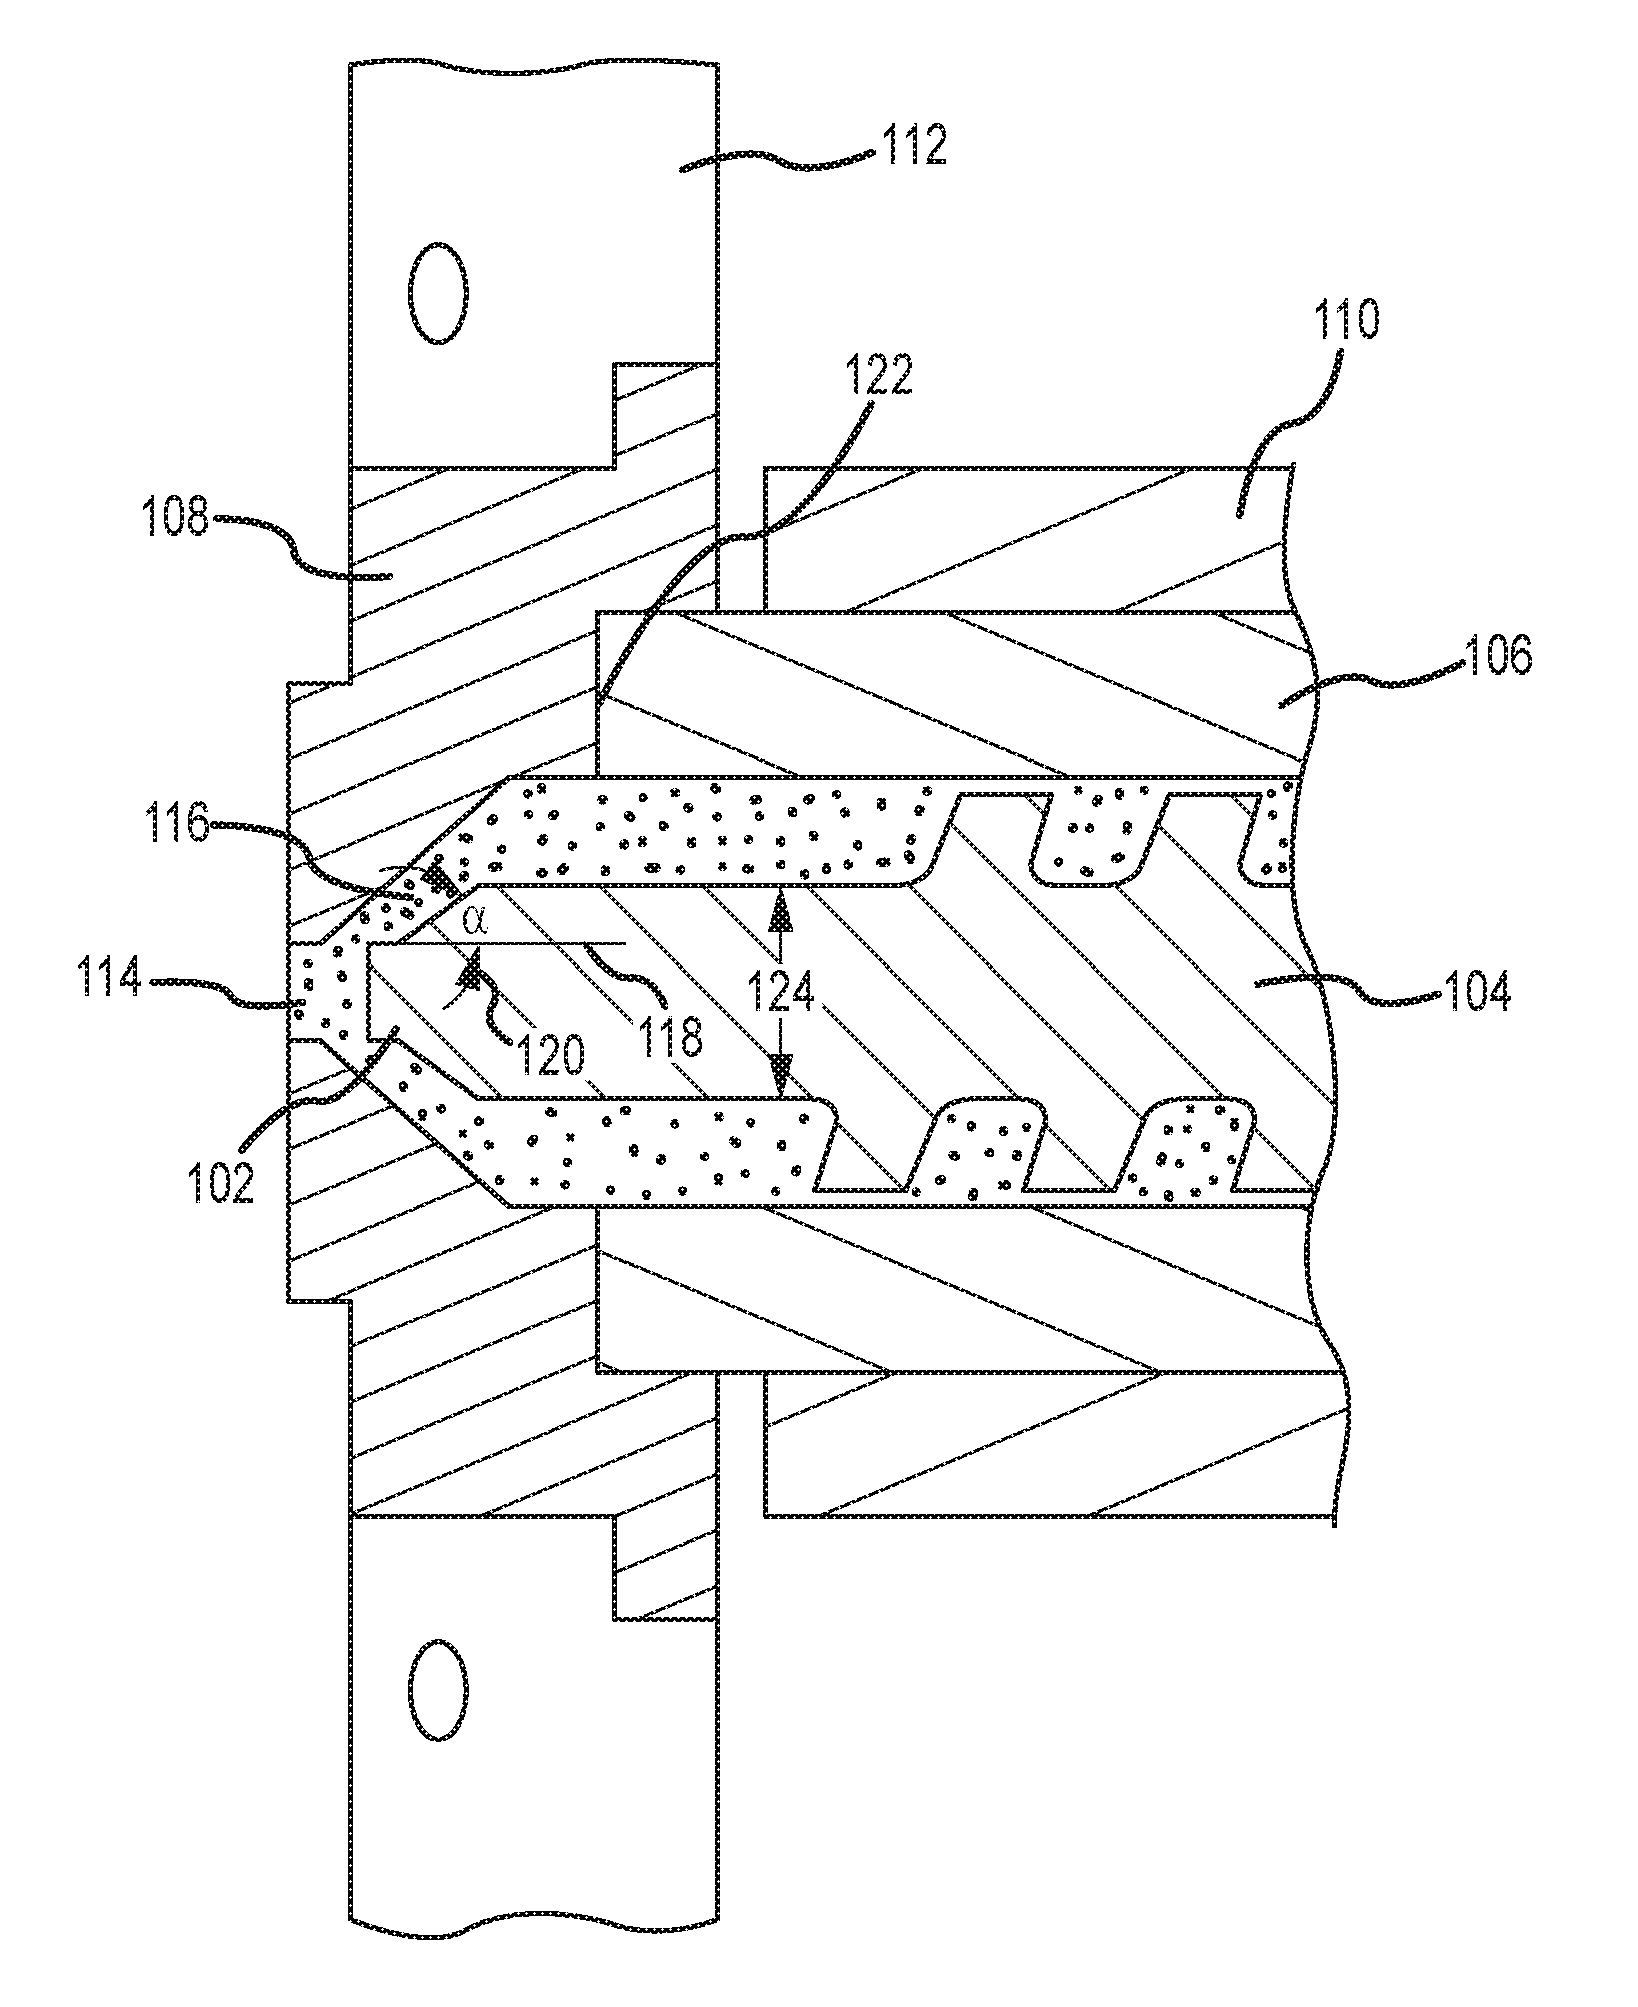 Nozzle shut off for injection molding system